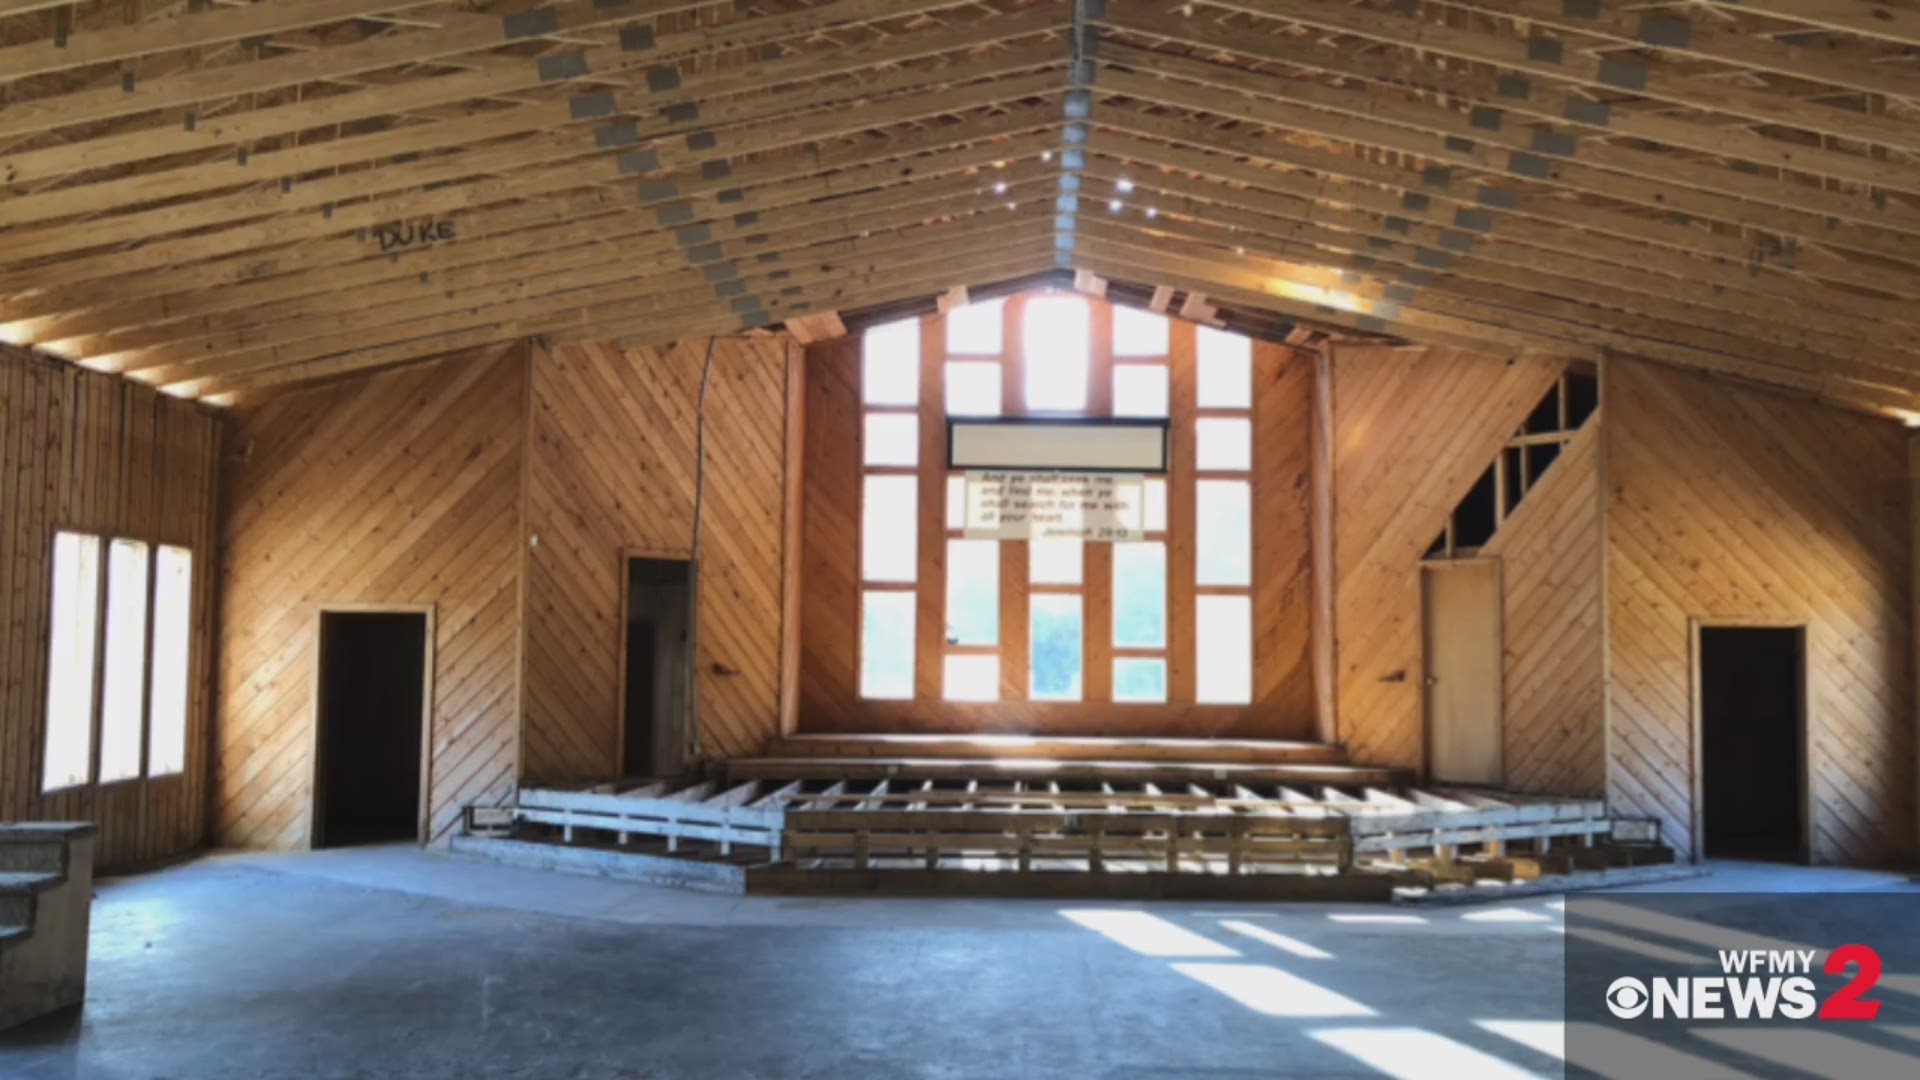 Thomasville Christian Fellowship Church is rebuilding after its roof collapsed last year. It isn't quite ready for Easter Sunday Service, but it's coming along beautifully.